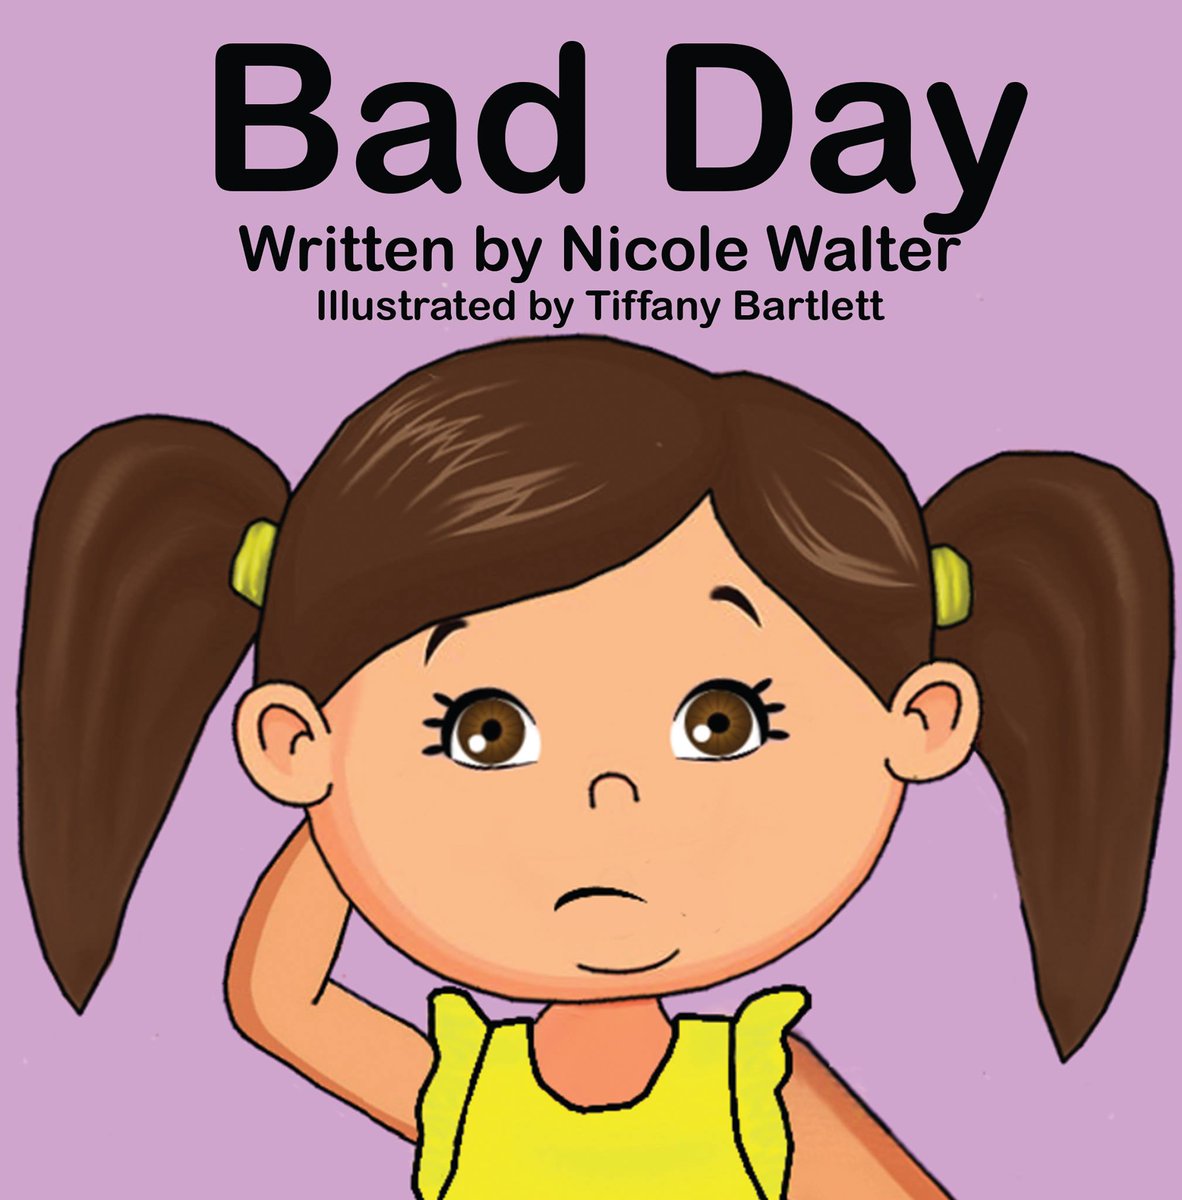 Have you read our #childrensbook about a little girl who has a #badday and does everything backwards? Avail. on Amazon, BN, IndieBound, and select retailer websites. #ICYMI #TBT #bookrelease